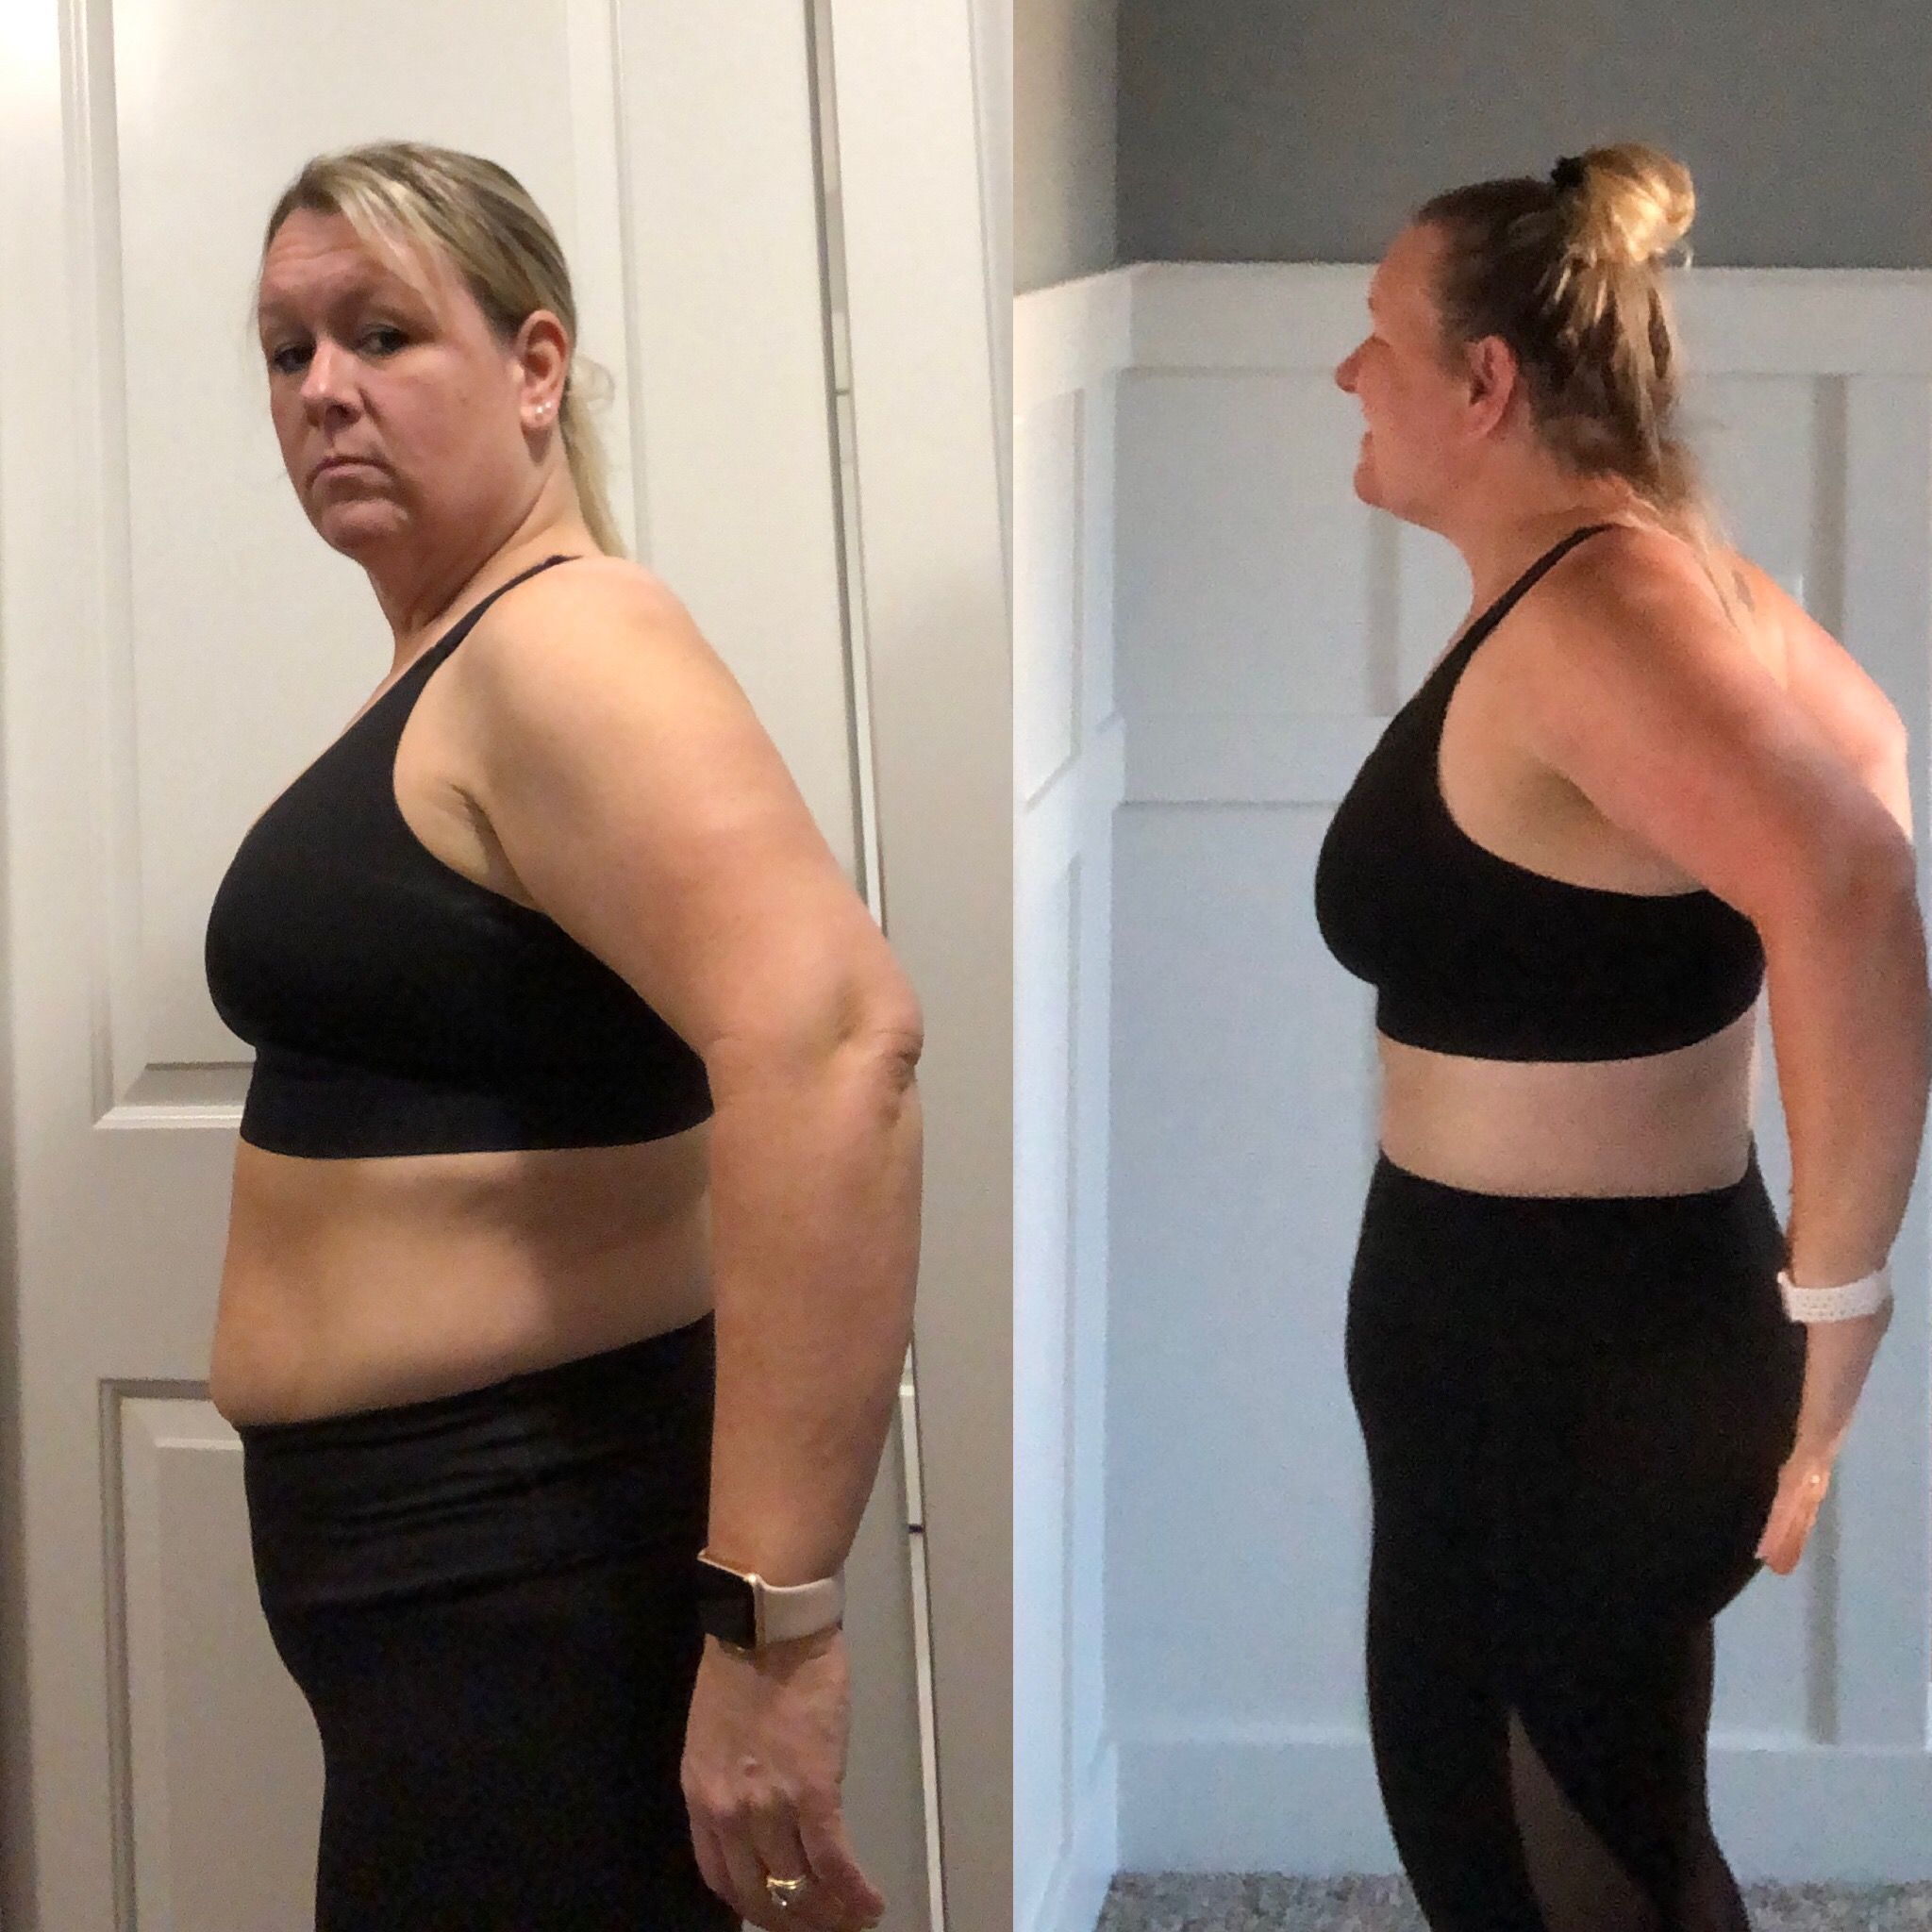 Marcy Lost 11 Pounds and 6 Inches with the 30 Day Clean Eating... - Marcy Lost 11 Pounds and 6 Inches with the 30 Day Clean Eating... -   18 fitness Training clean eating ideas